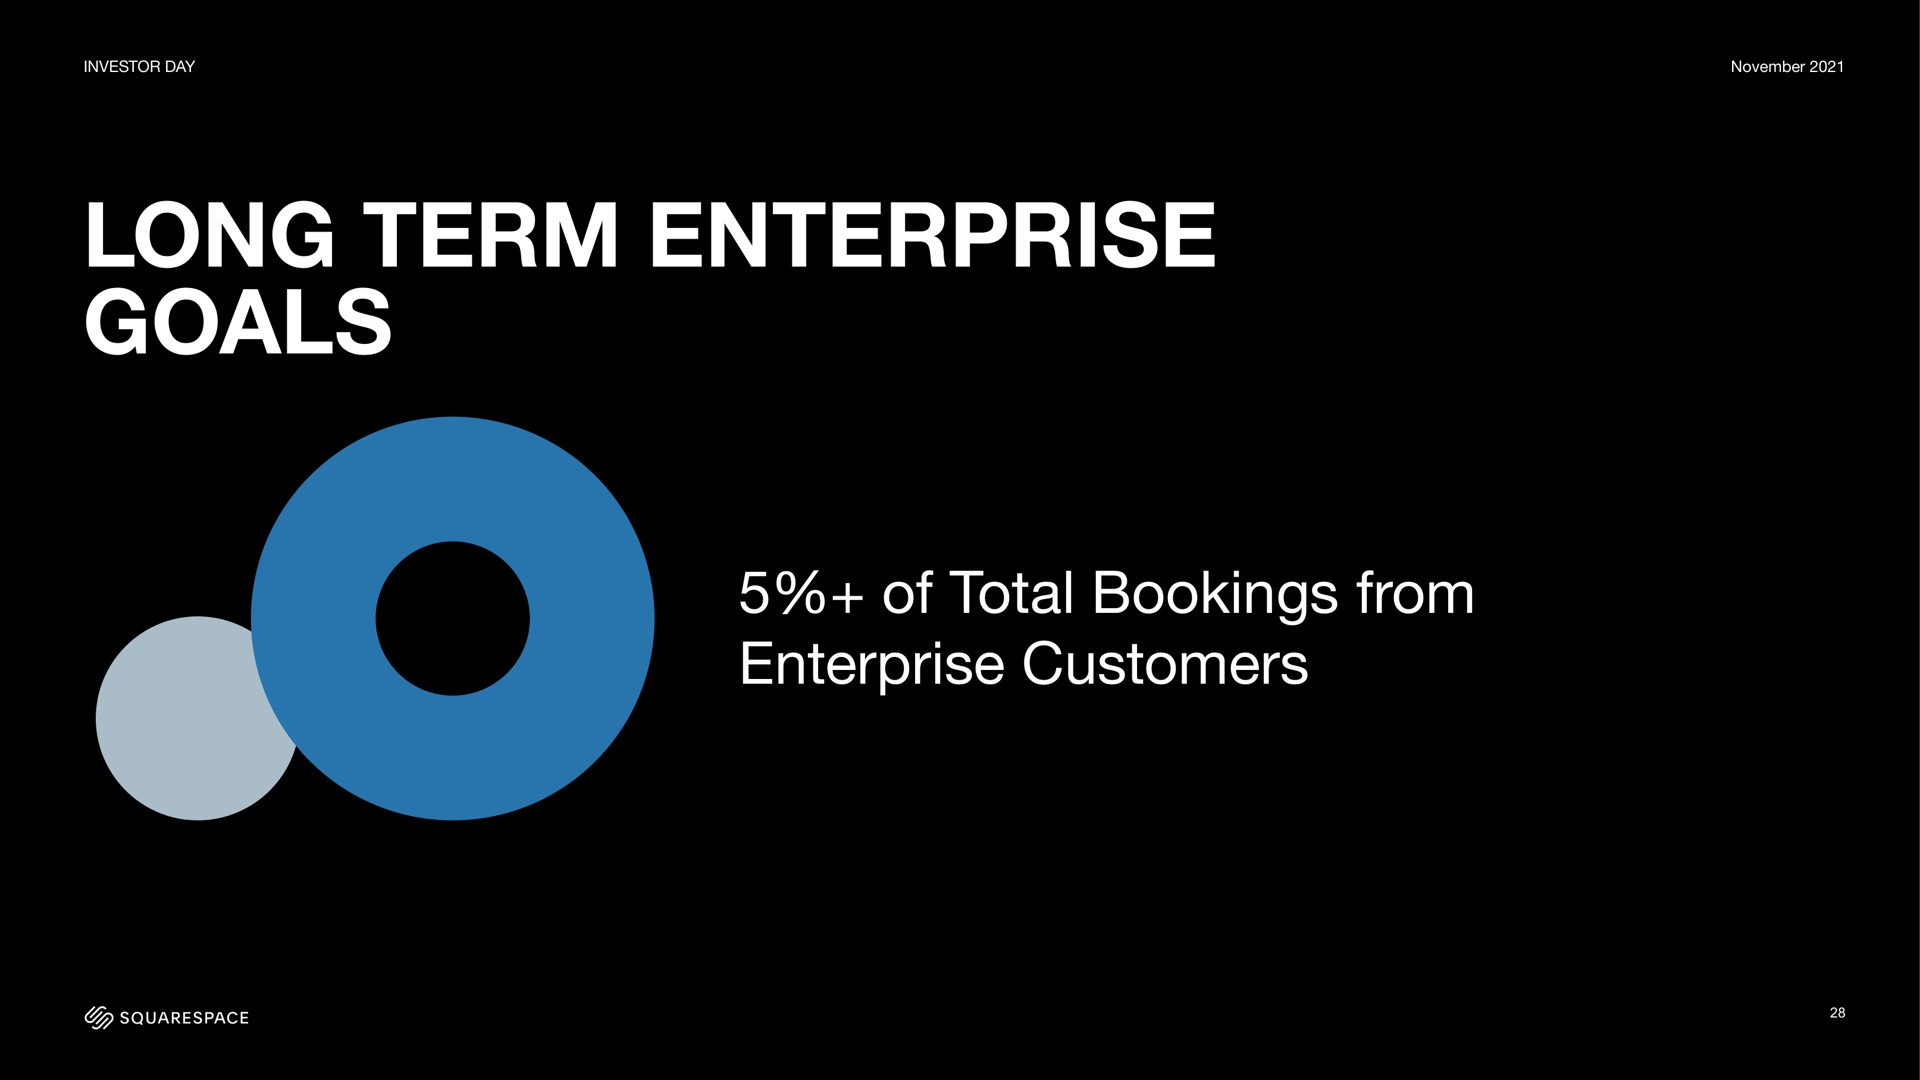 long term enterprise goals of total bookings from enterprise customers | Squarespace